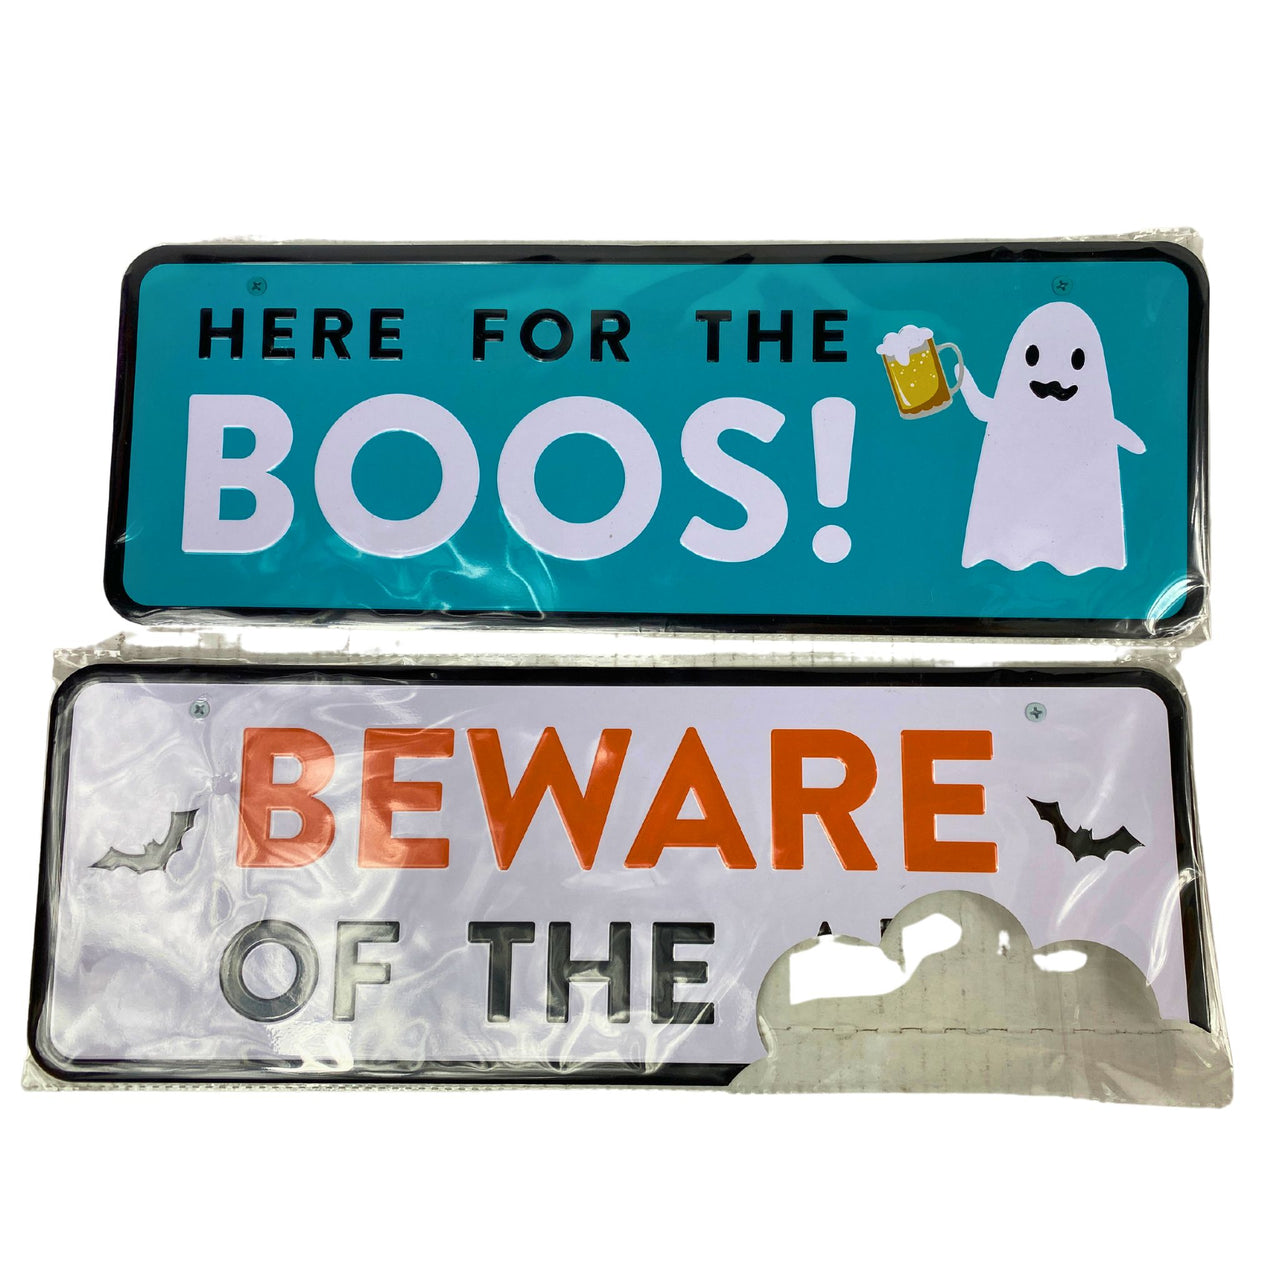 Metal Sign 14inx5in Here For The Boos , Beware Of The